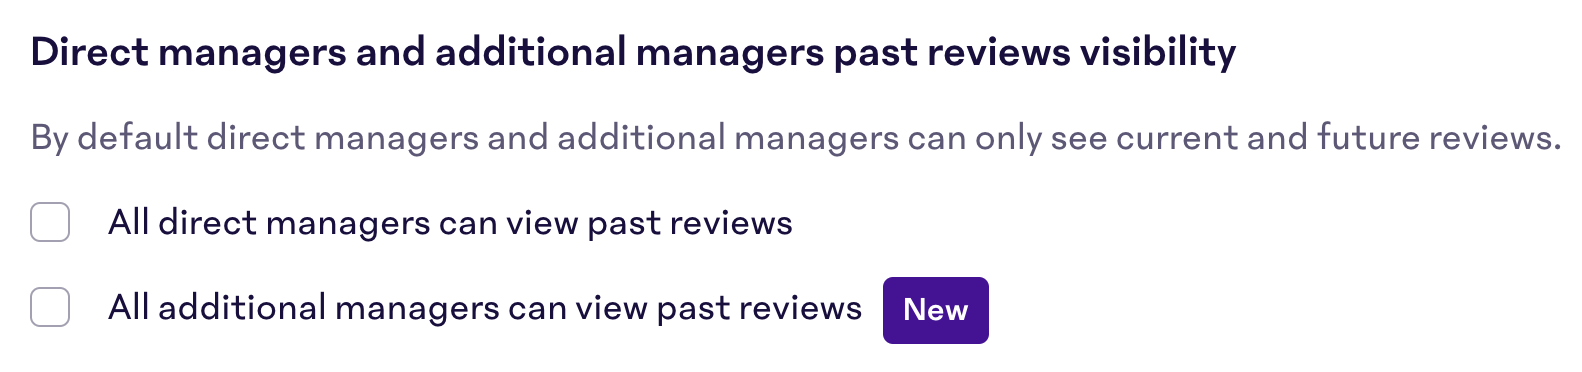 Manager-Historical-Visibility.png